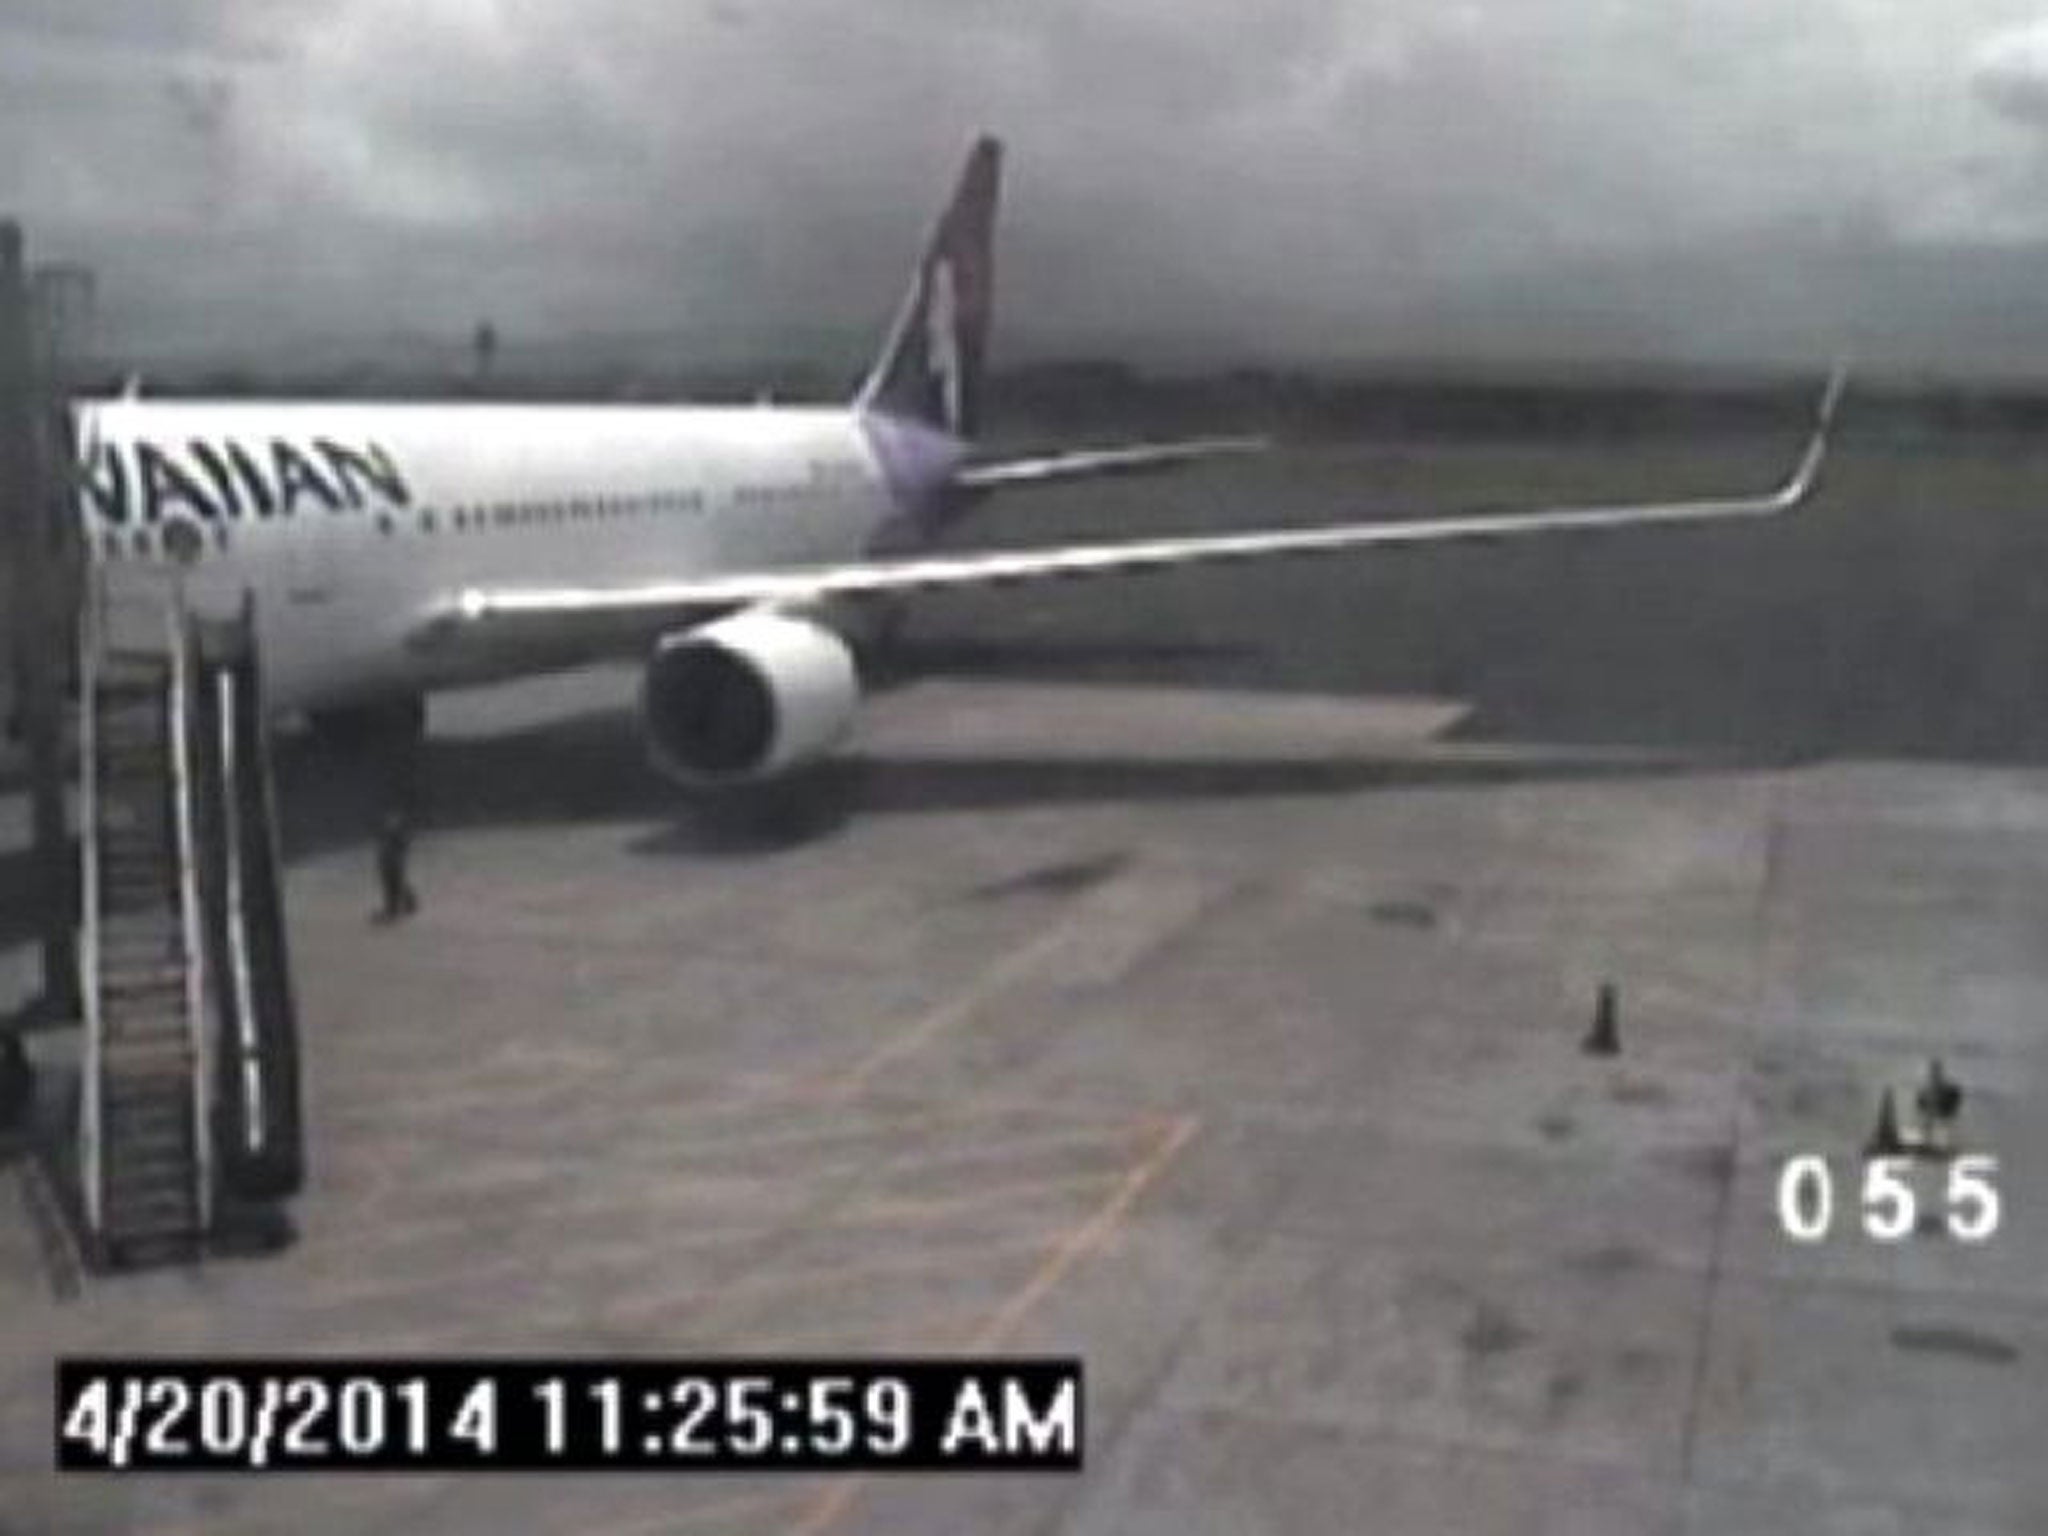 This April 20, 2014 image taken from a surveillance video provided by the Hawaii Department of Transportation, shows a California teen, left, after hopping from a jet's wheel well in Maui, Hawaii. Police said Tuesday, May 6, that they plan to interview th